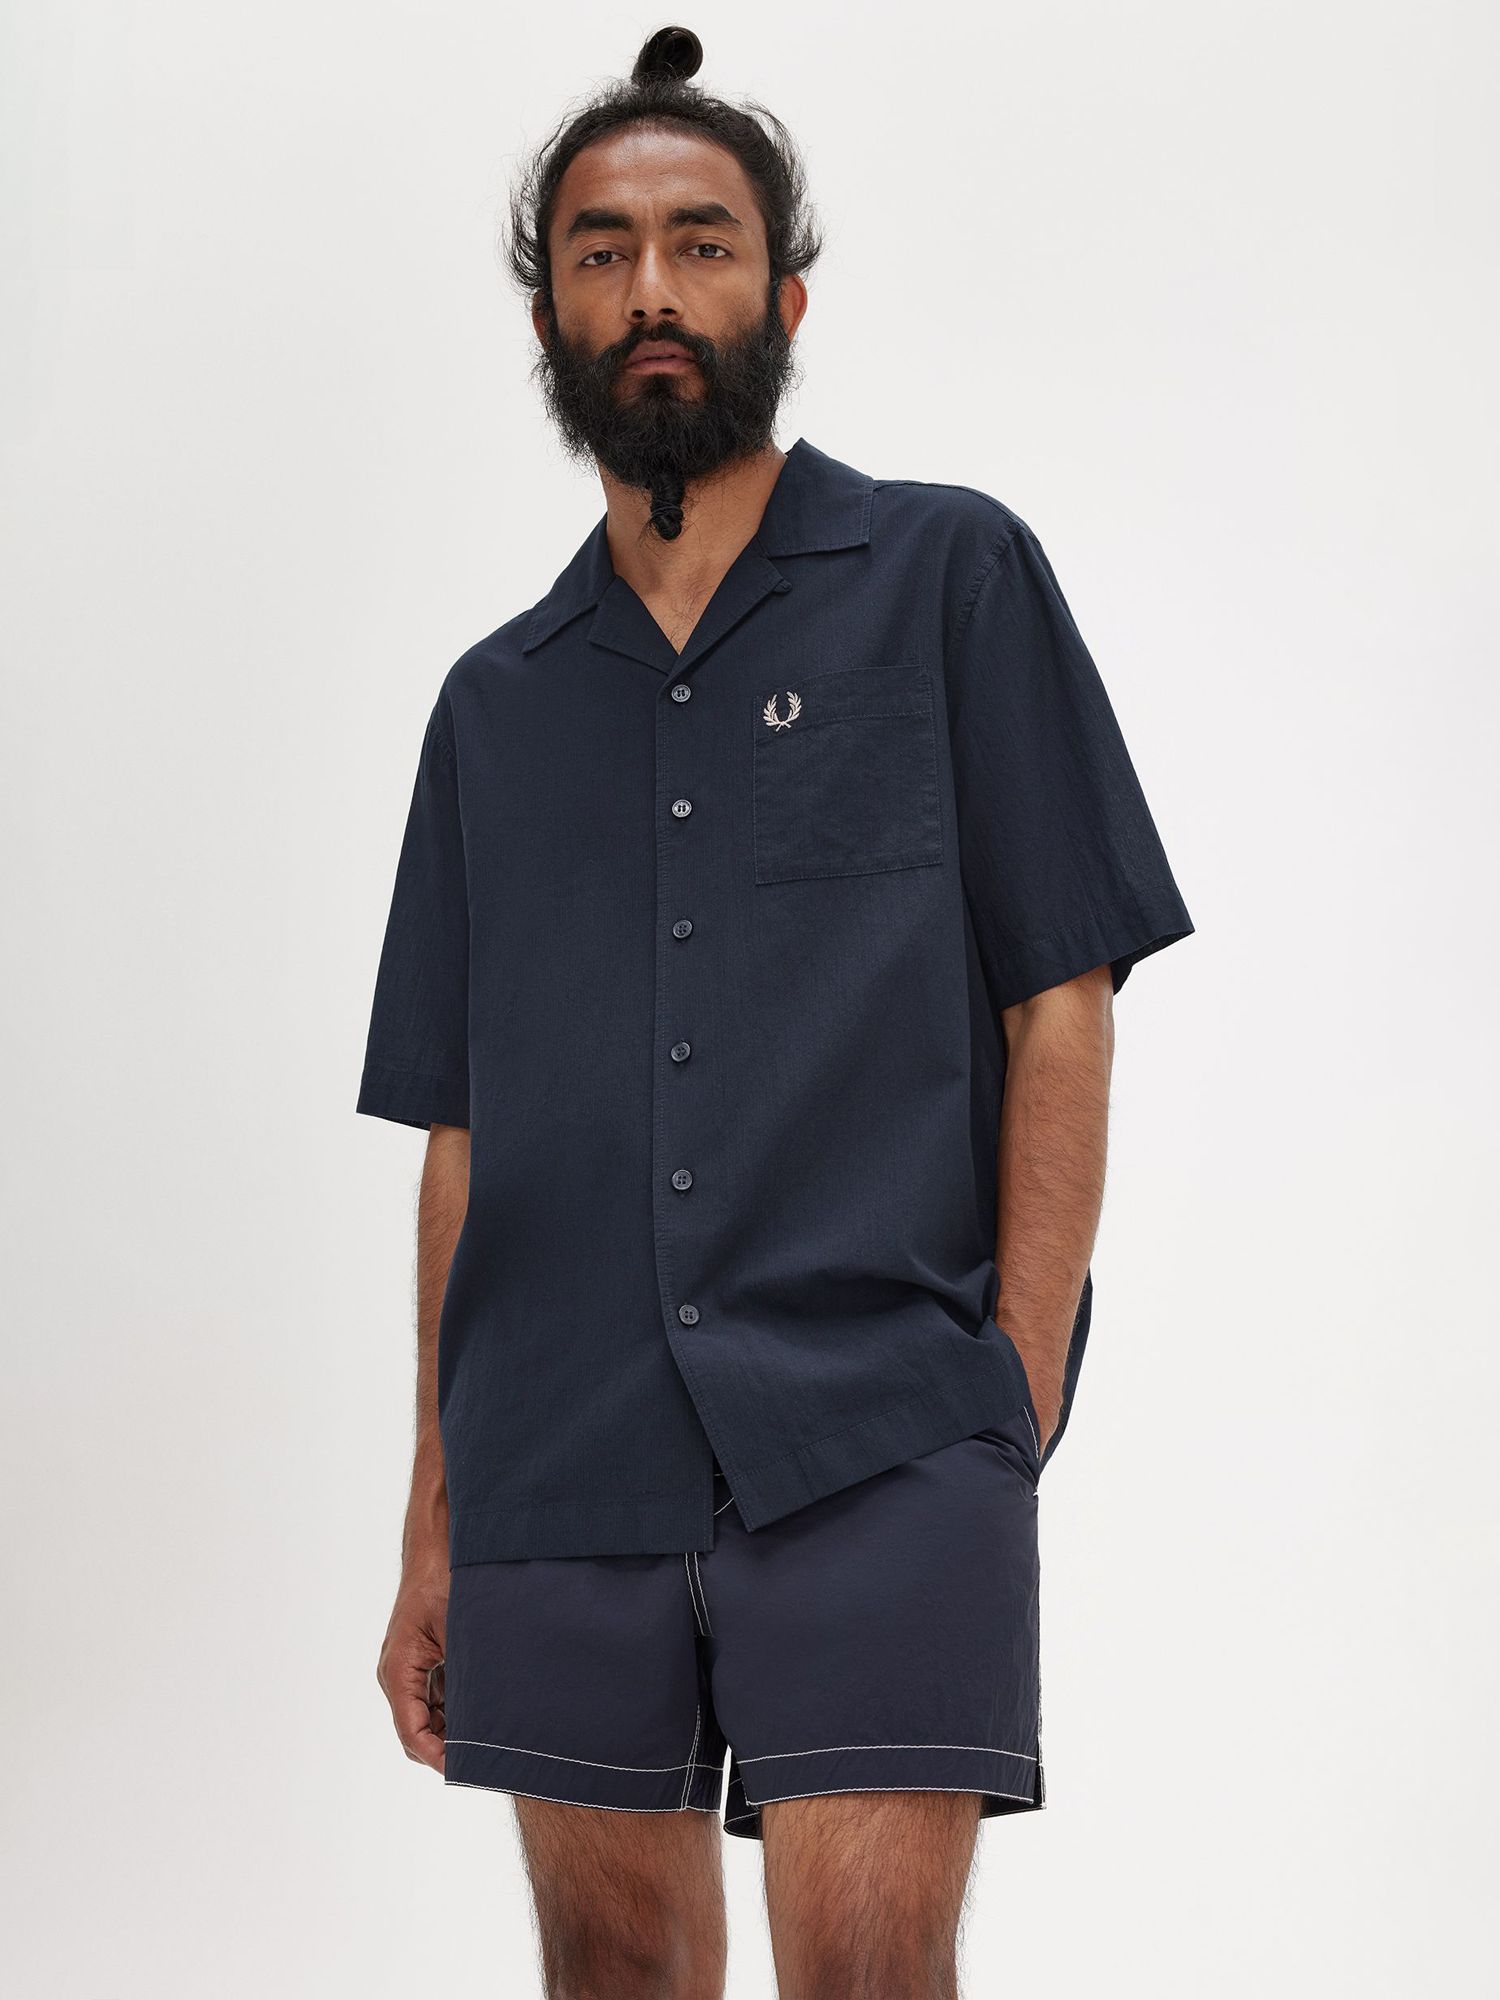 Fred Perry Revere Collar Shirt, Navy, S